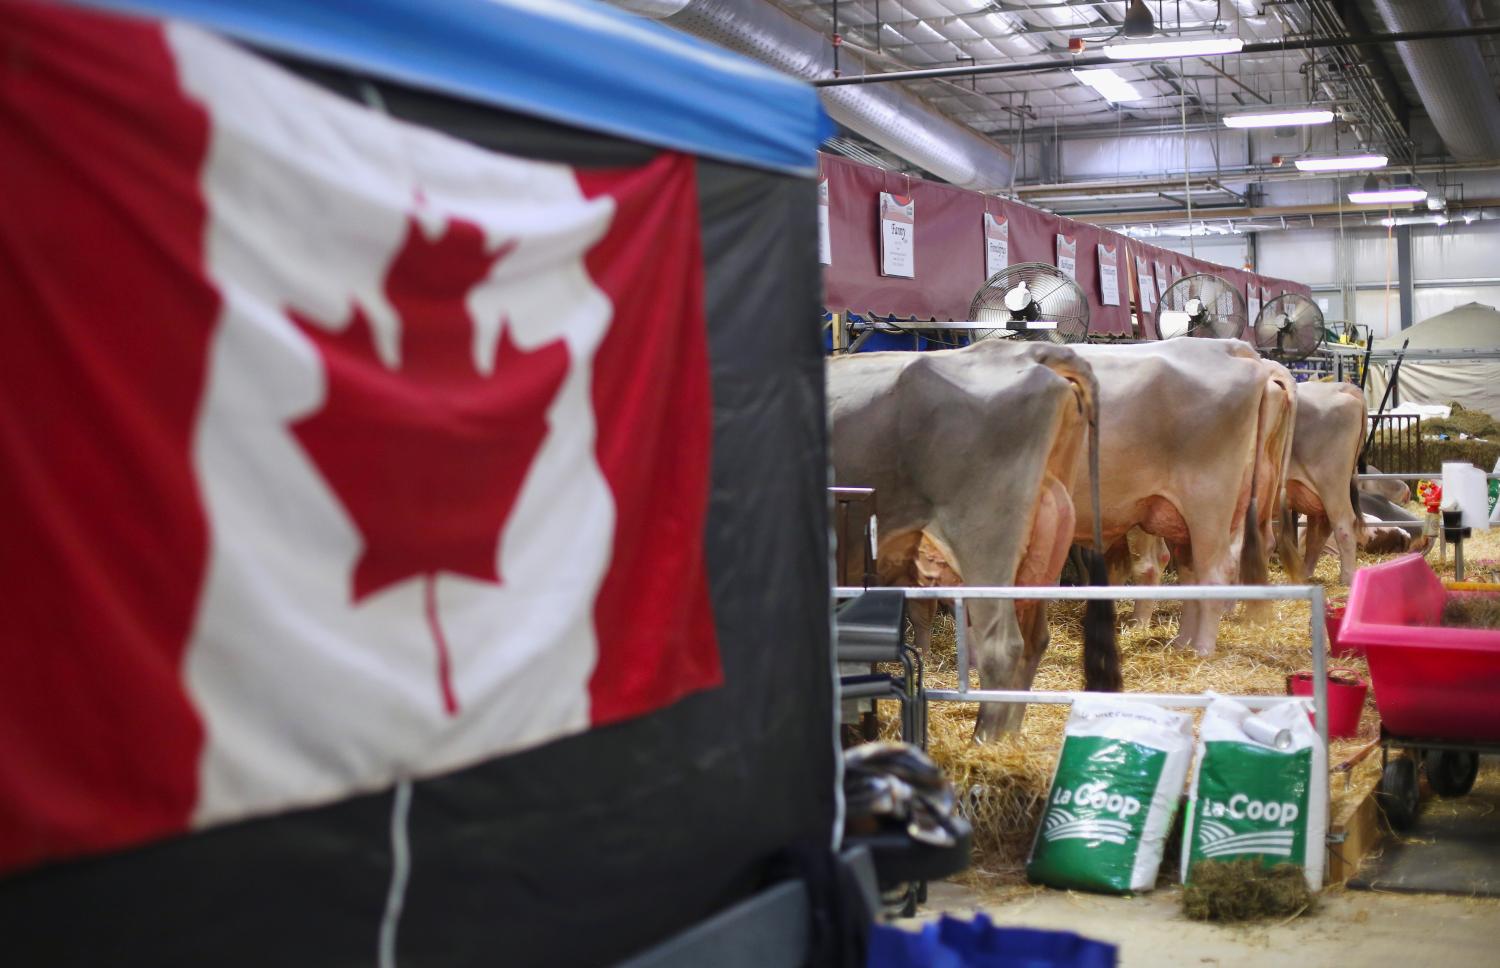 Cows are fed inside the exhibition hall as a Canadian flag is displayed nearby during the World Dairy Expo in Madison, Wisconsin, U.S., October 3, 2018.  REUTERS/Ben Brewer - RC15D1230E20